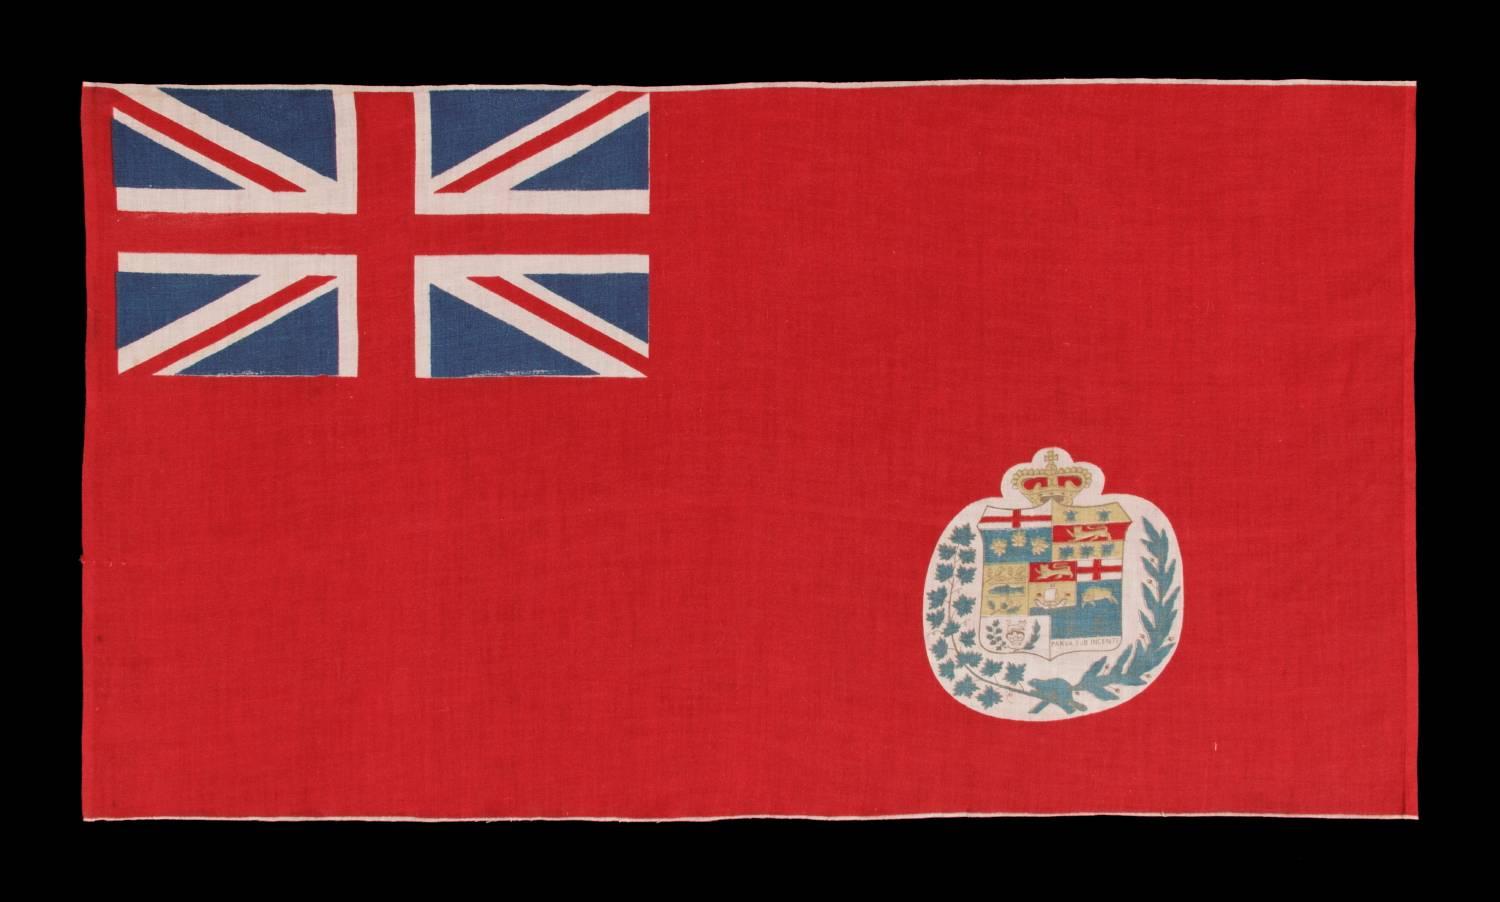 Canadian version of the British red ensign, a parade flag on its original staff, 1873-1905.

Canadian version parade flag, printed on cotton, in the design used between 1873 and 1905. This was one of the earliest versions of the basic design flown